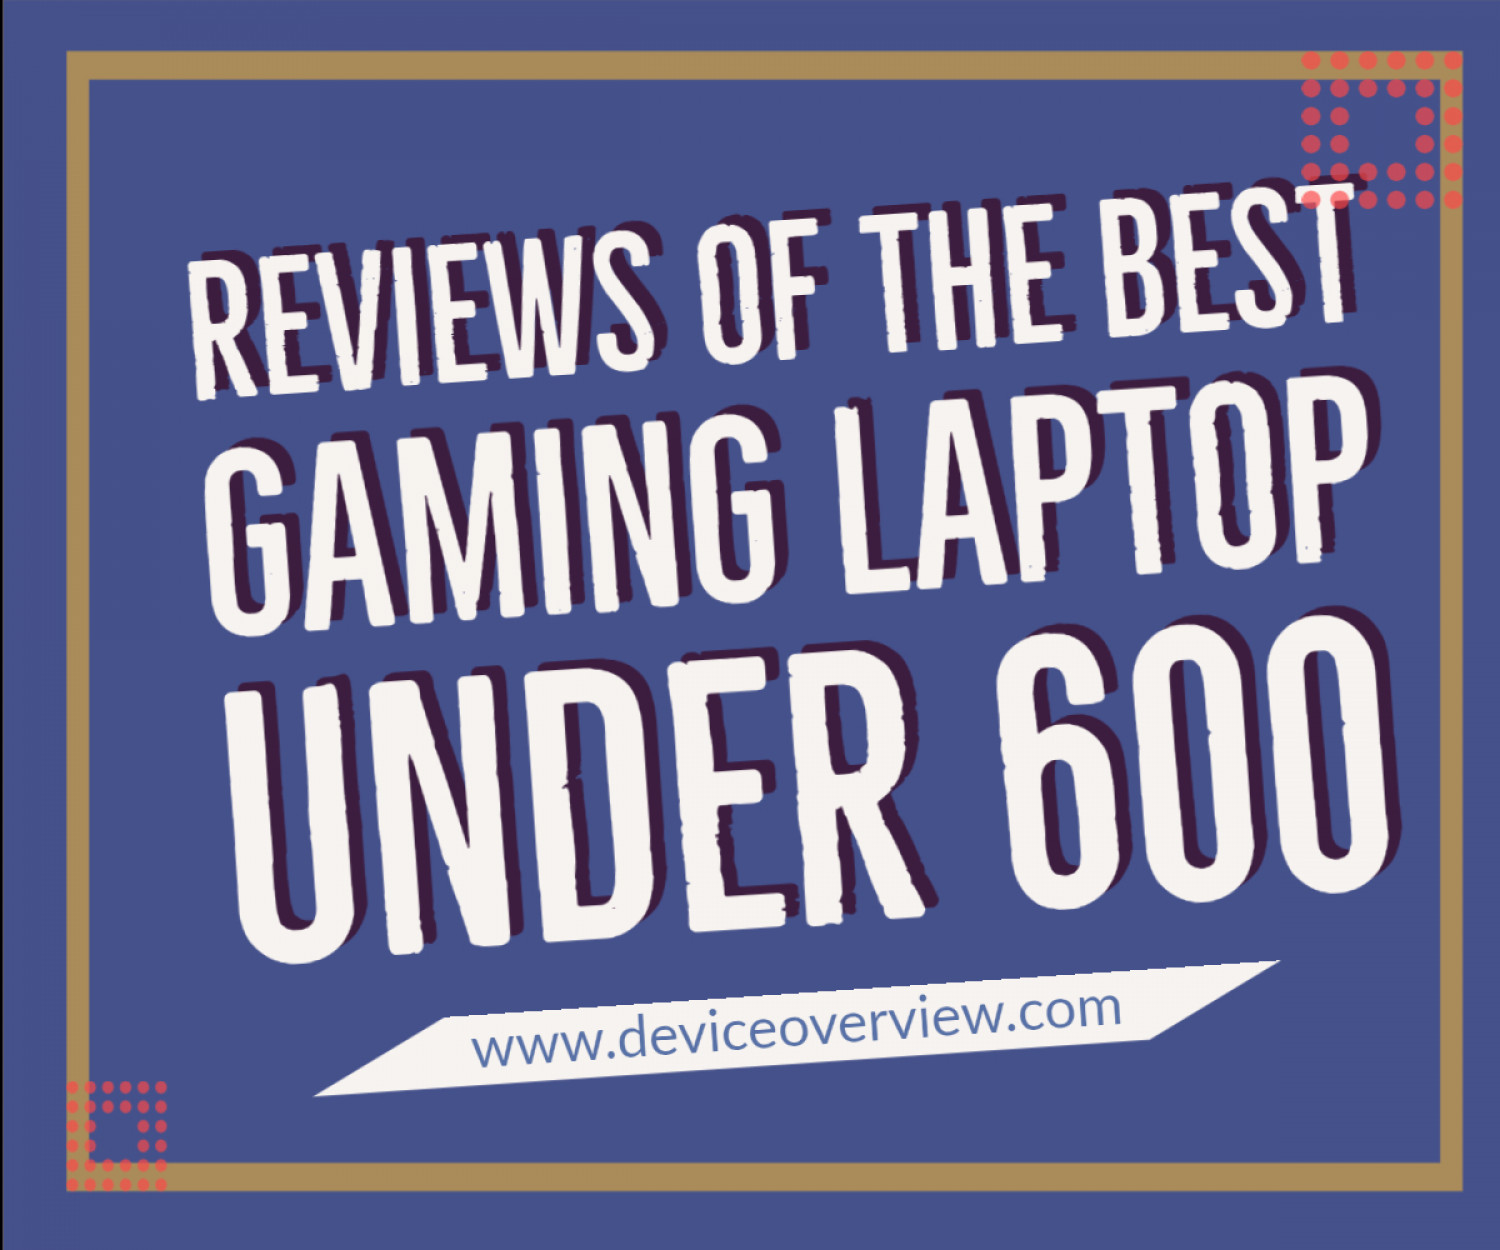 Review Of The Best Gaming Laptop Under 600 Infographic